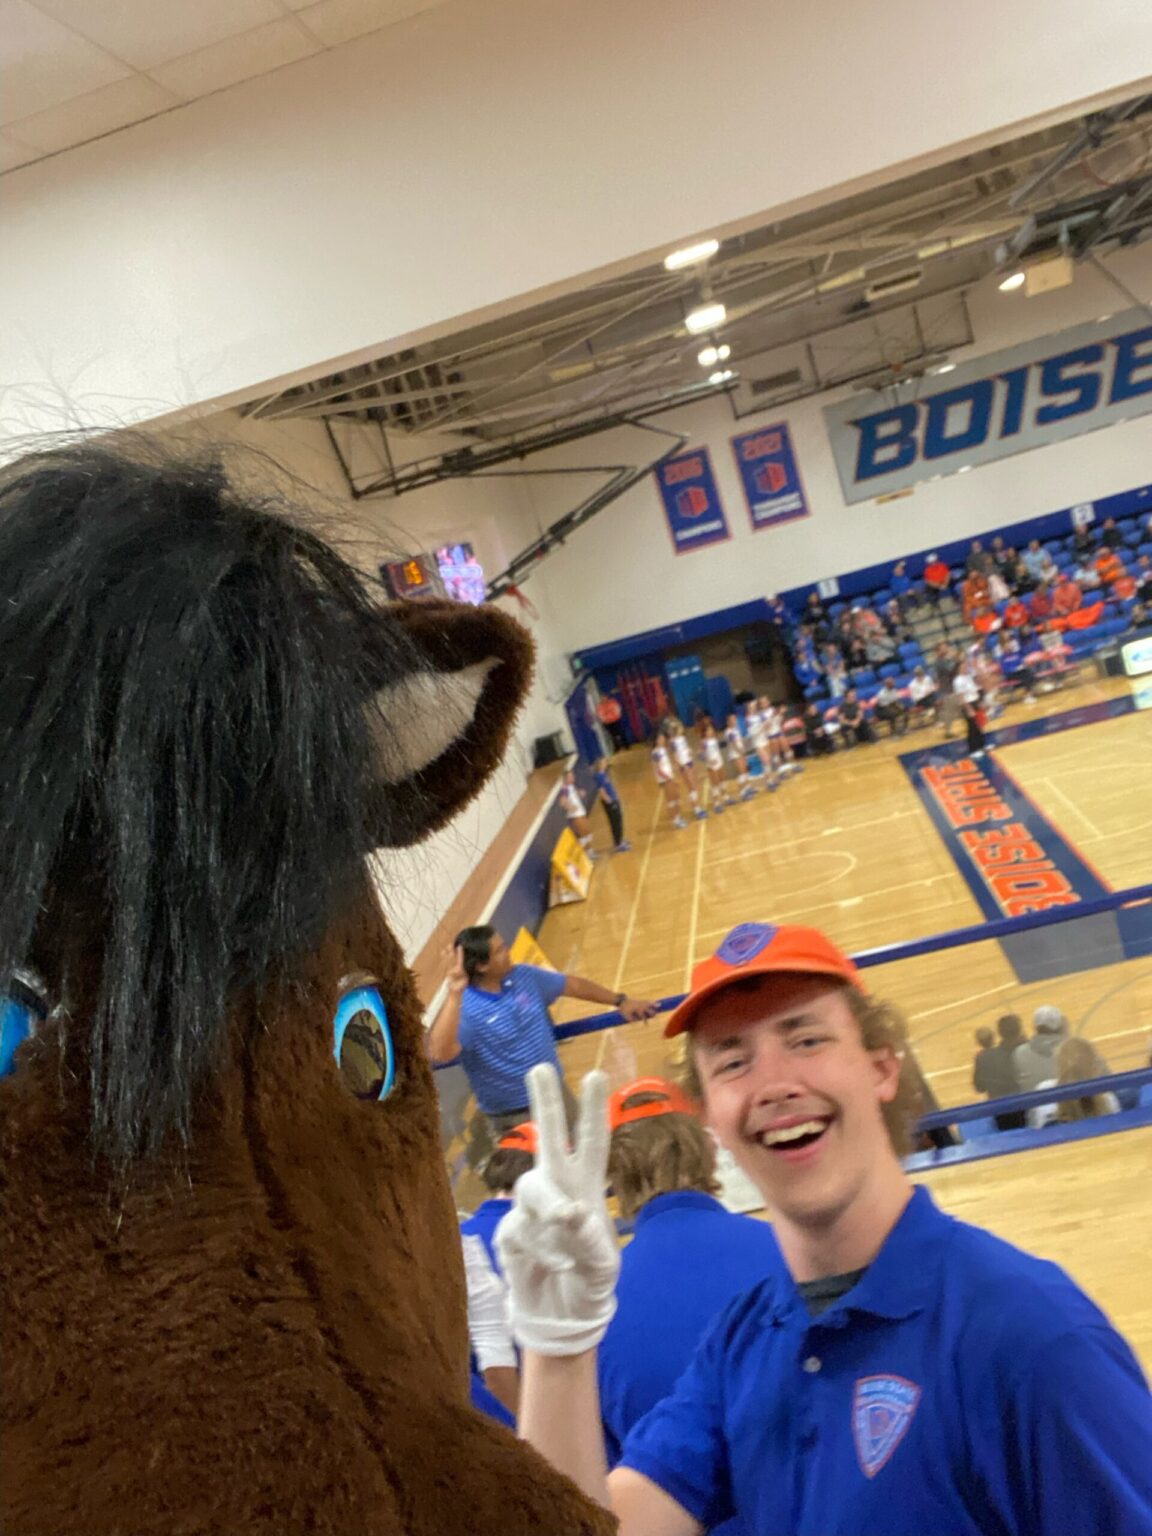 Seamus Jude behind Buster Bronco in the Boise State Gym